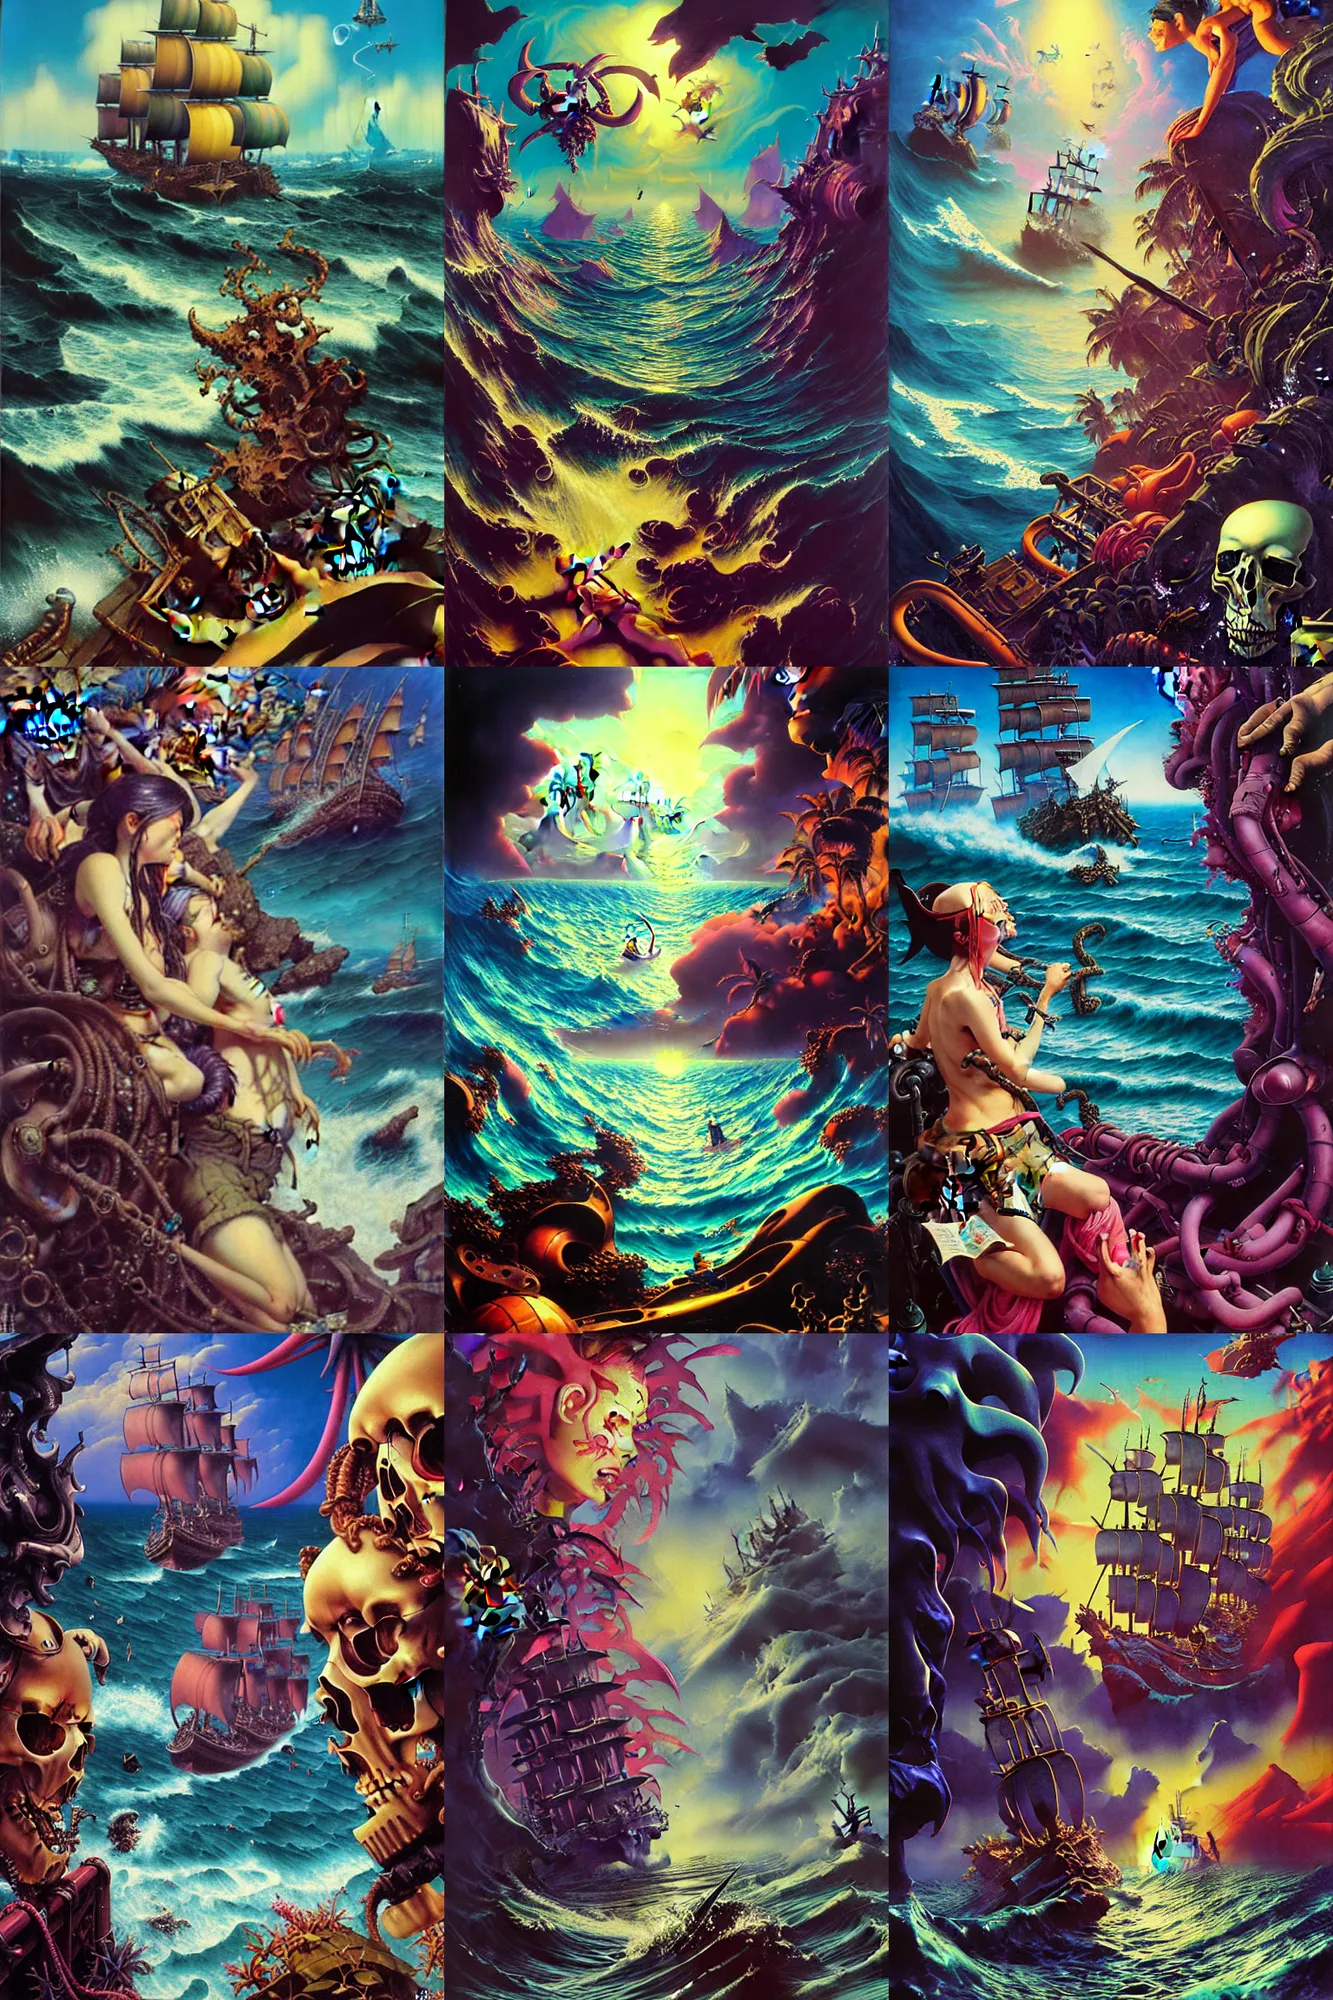 Prompt: realistic detailed image of a sea of thieves scene by lisa frank, ayami, kojima, amano, karol bak, greg hildebrandt, and mark brooks, neo - gothic, gothic, rich deep colors. beksinski painting, part by adrian ghenie and gerhard richter. art by takato yamamoto. masterpiece